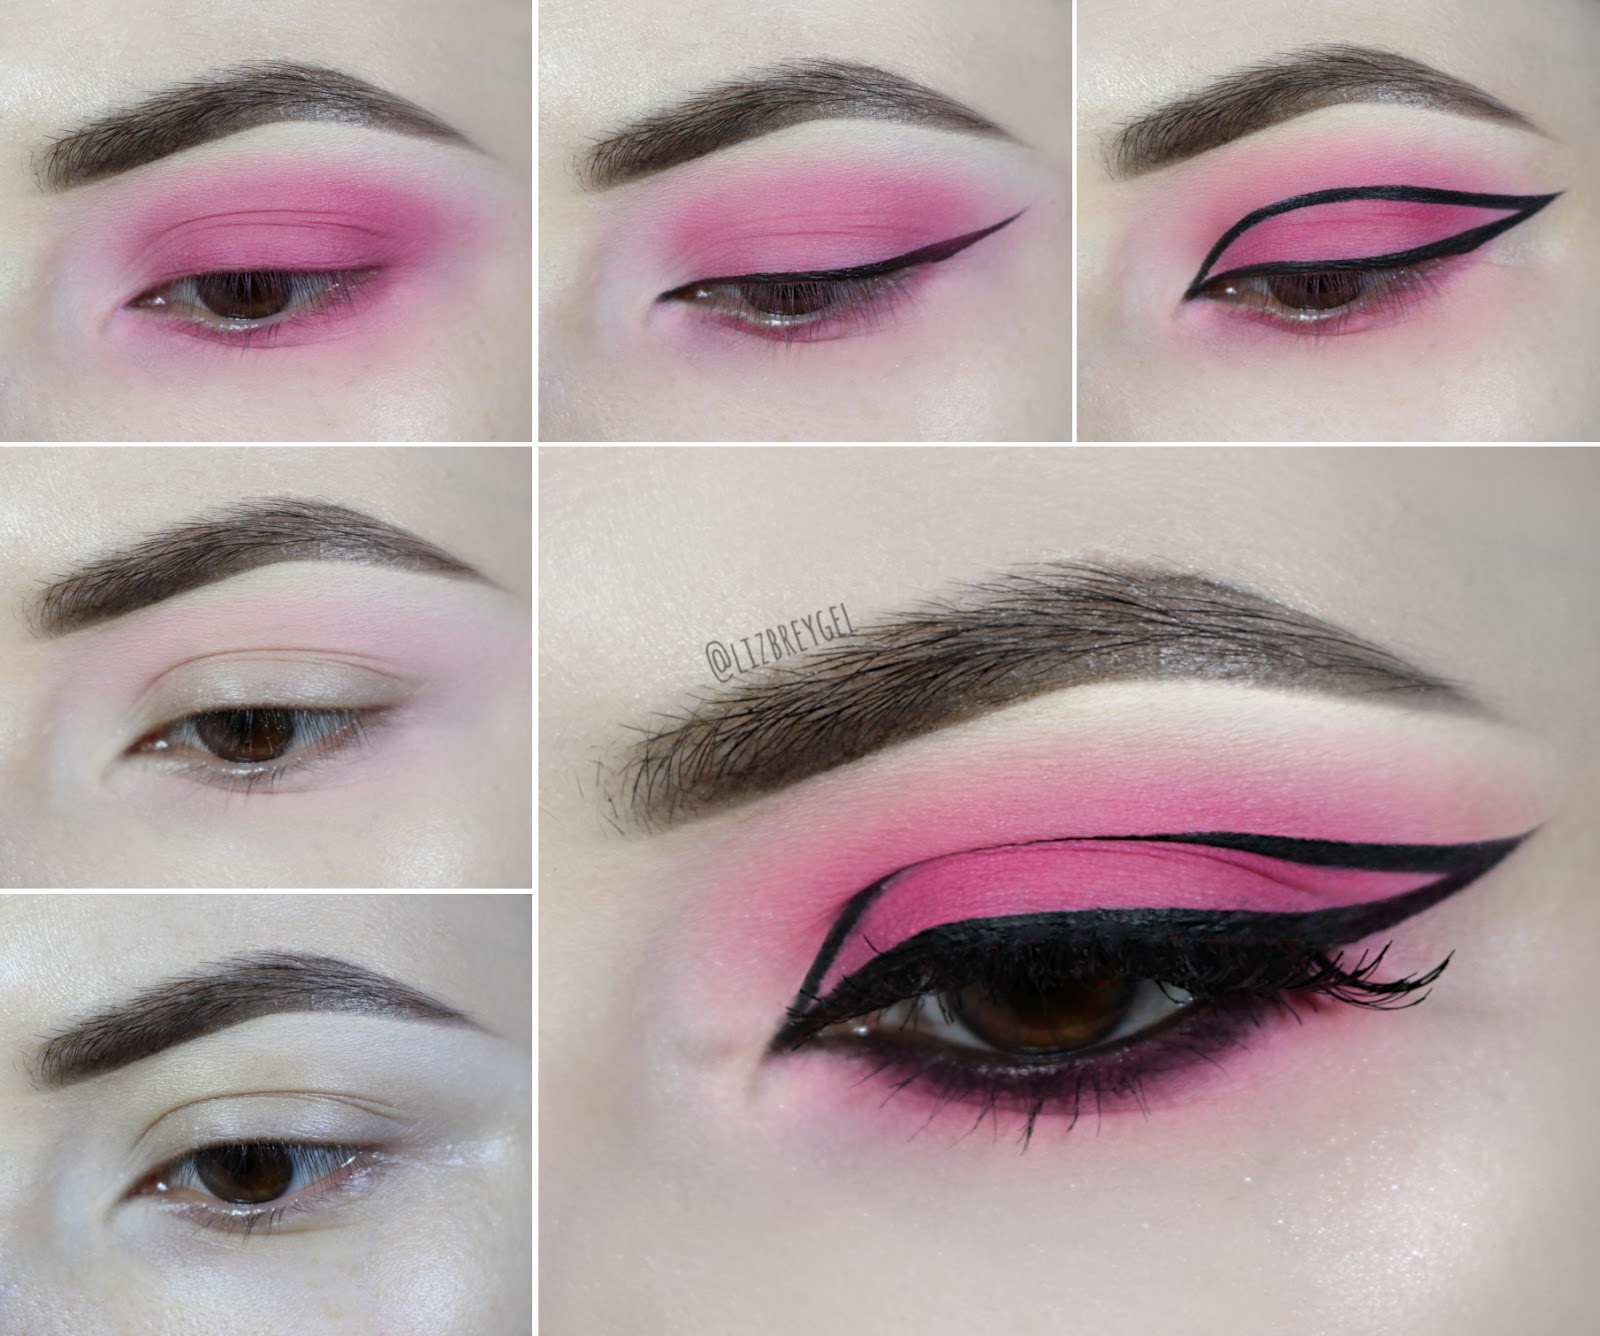 bubblegum pink and graphic eyeliner step by step makeup tutorial